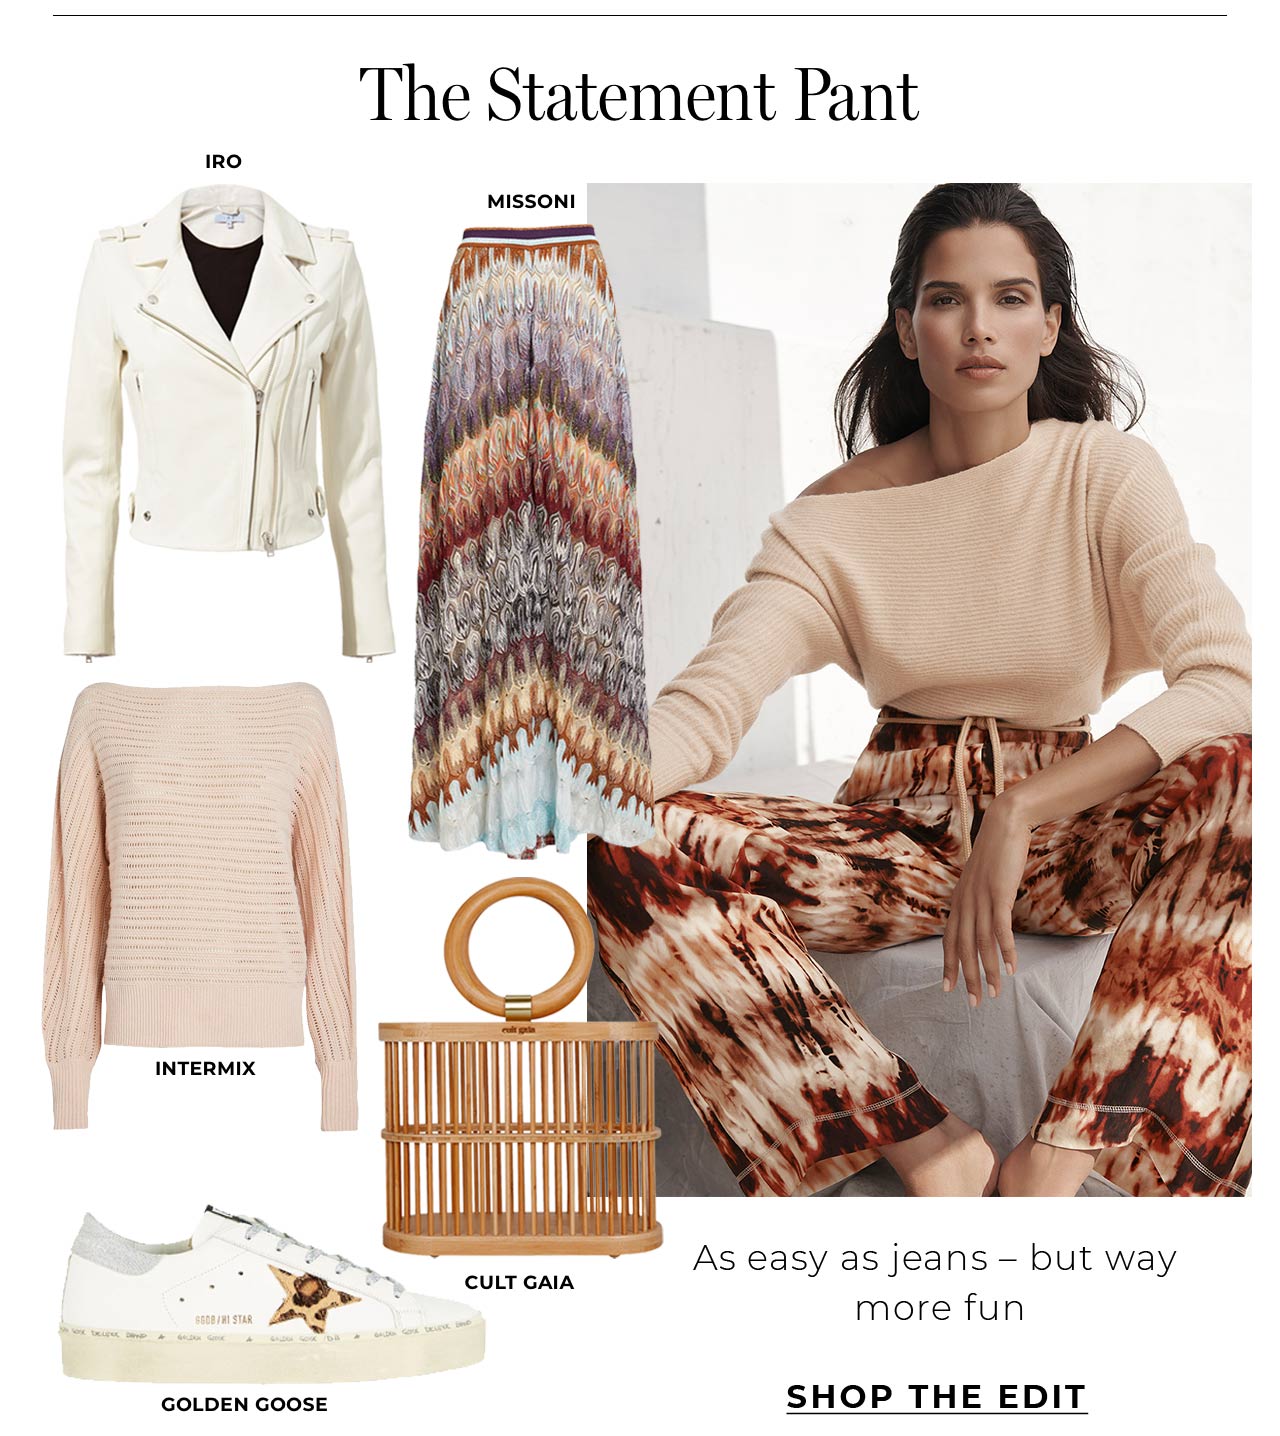 The statement pant is as easy as jeans, but way more fun